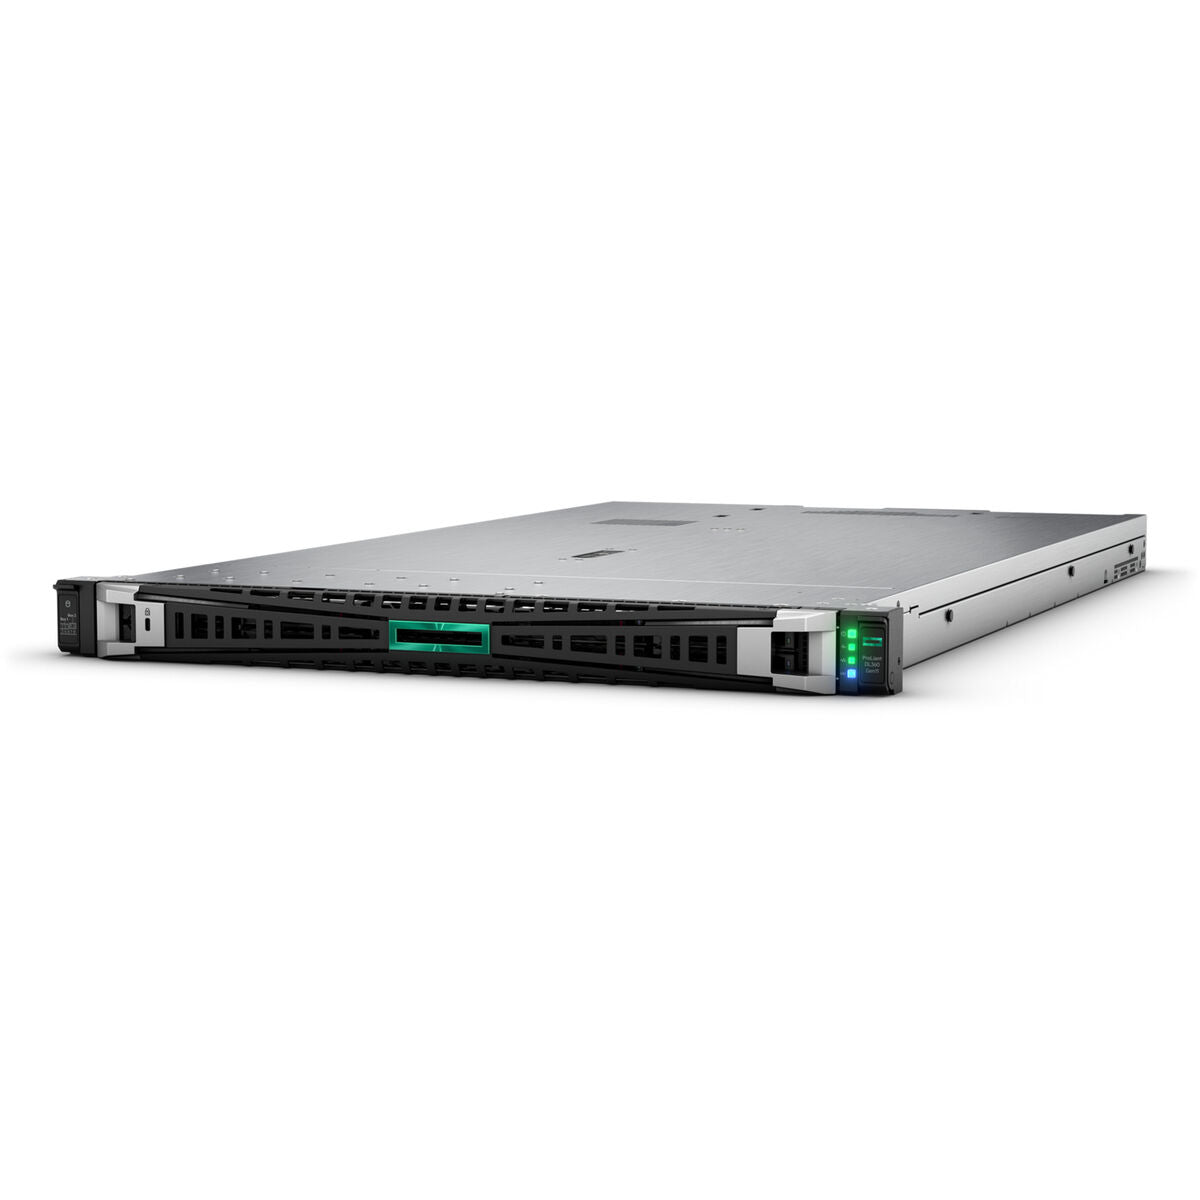 Server HPE P60735-421 32 GB RAM, HPE, Computing, server-hpe-p60735-421-32-gb-ram, :480 GB, Brand_HPE, category-reference-2609, category-reference-2791, category-reference-2799, category-reference-t-19685, category-reference-t-19905, computers / components, Condition_NEW, office, Price_+ 1000, Teleworking, RiotNook